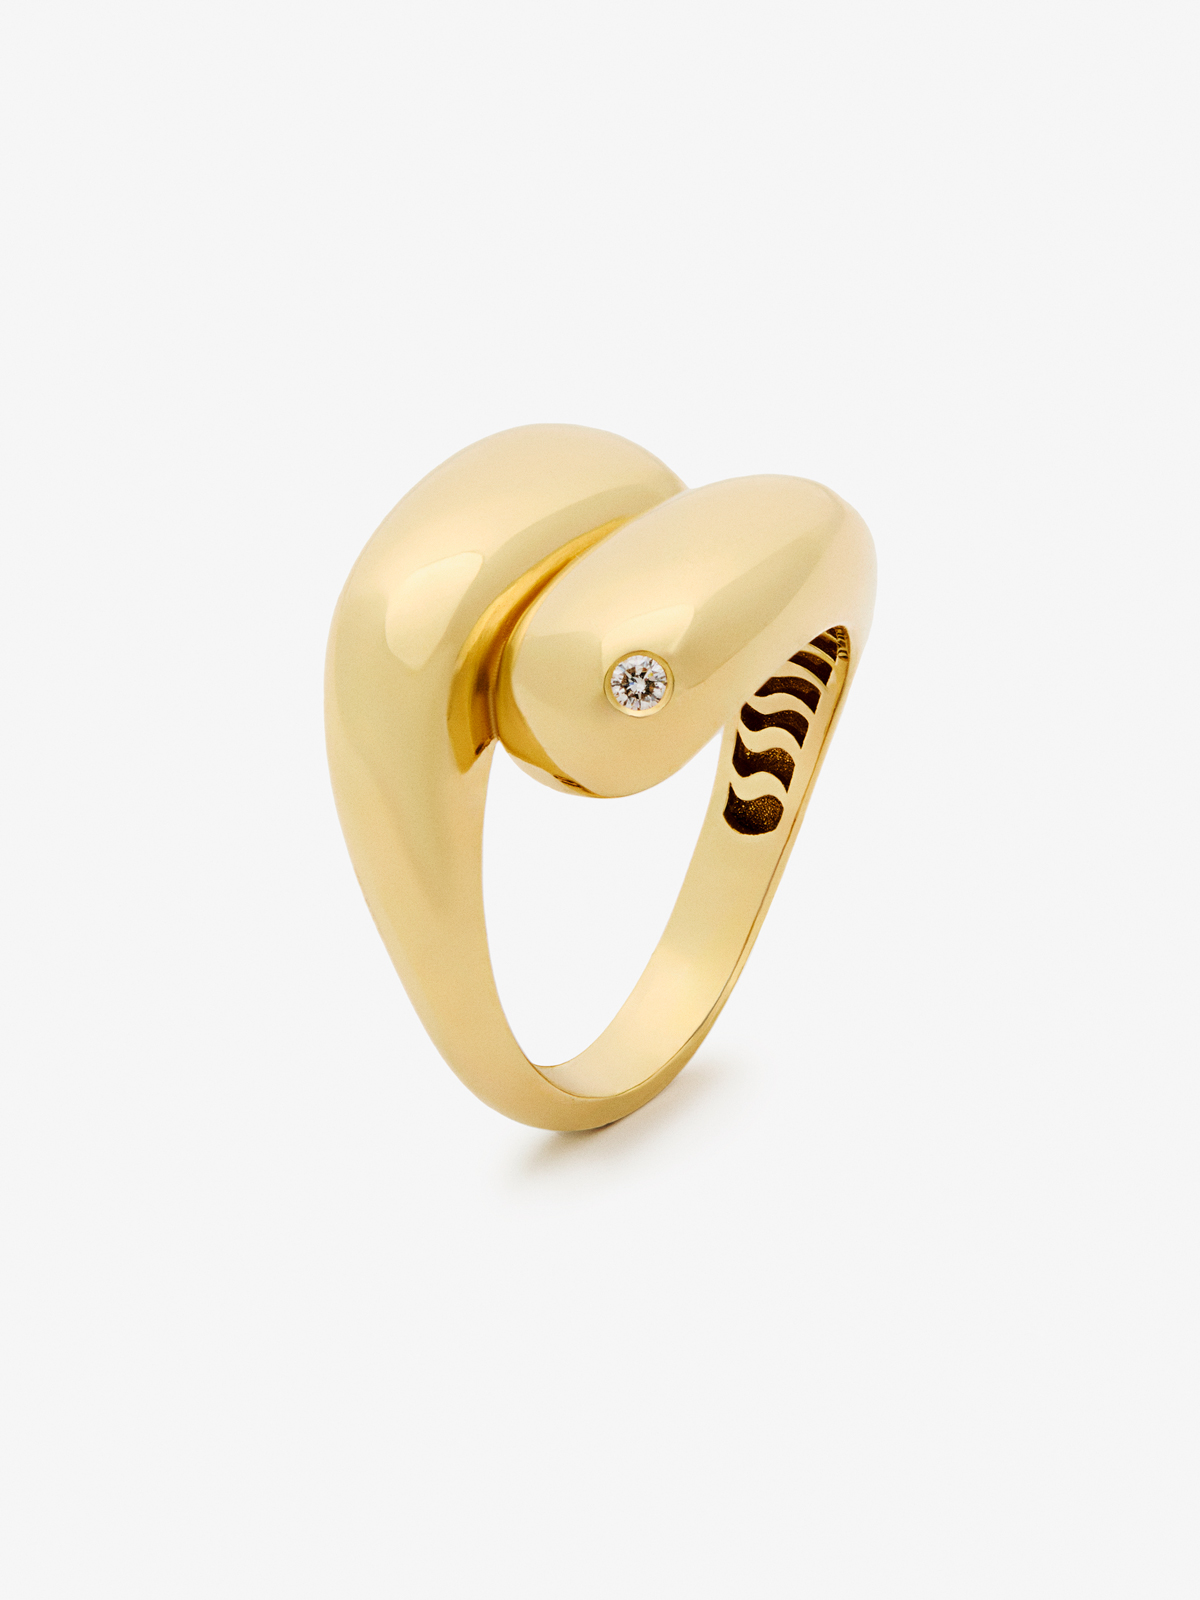 You and me ring in 18K yellow gold with 0.02 ct brilliant cut diamond